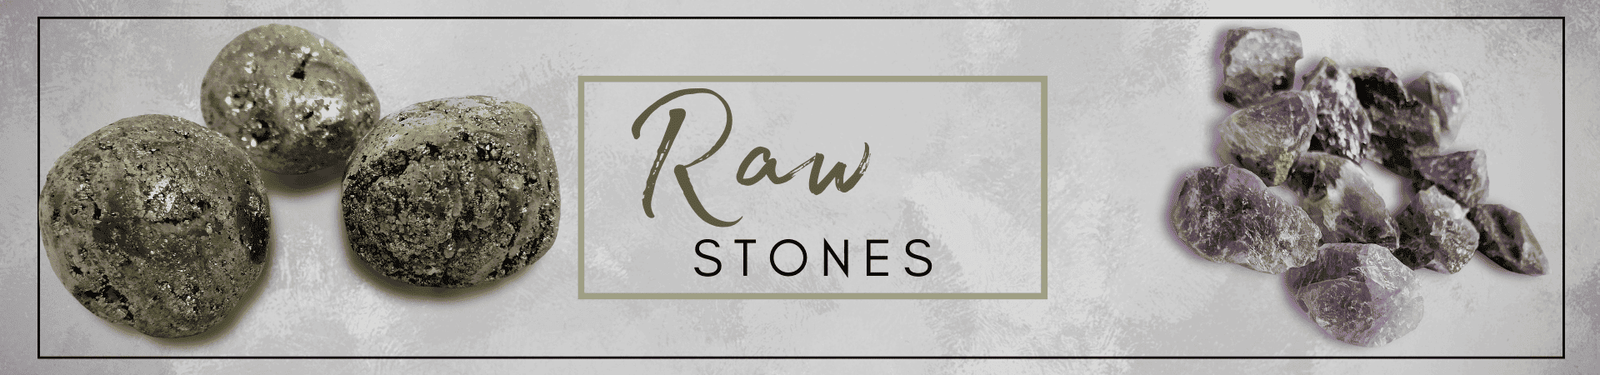 Raw stones boot your energy, confidences & increases healing properties.